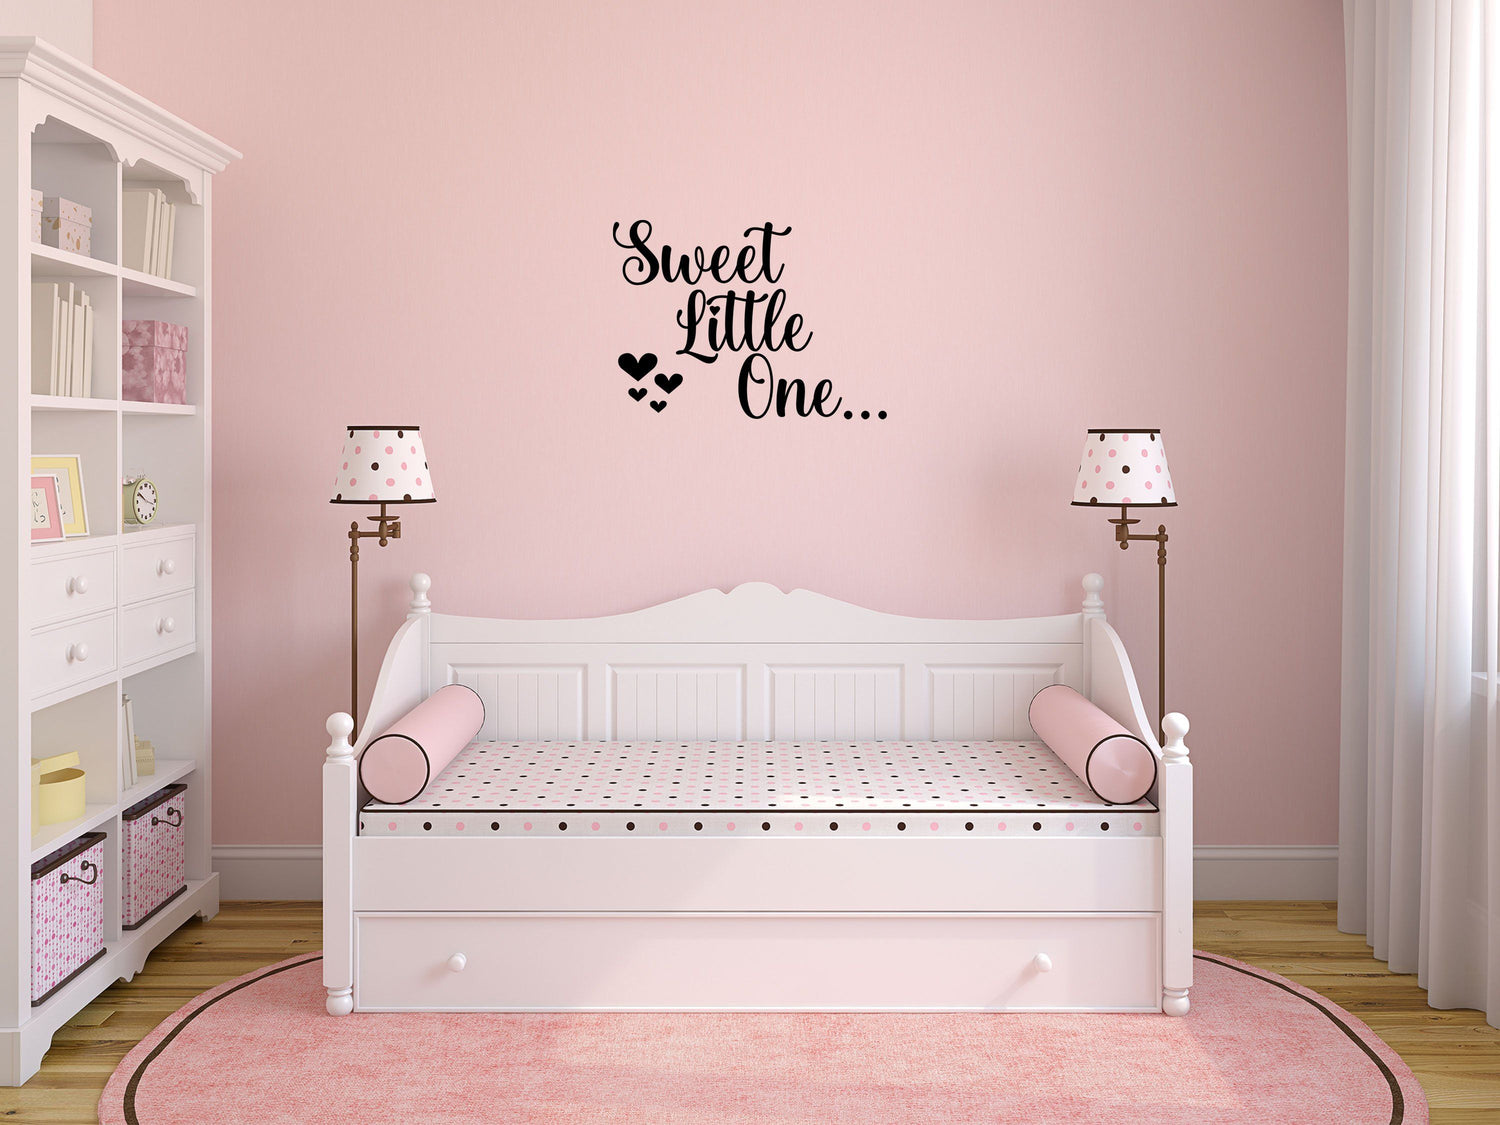 Printable Wall Art for a Little Girl's Room - Life is Sweeter By Design